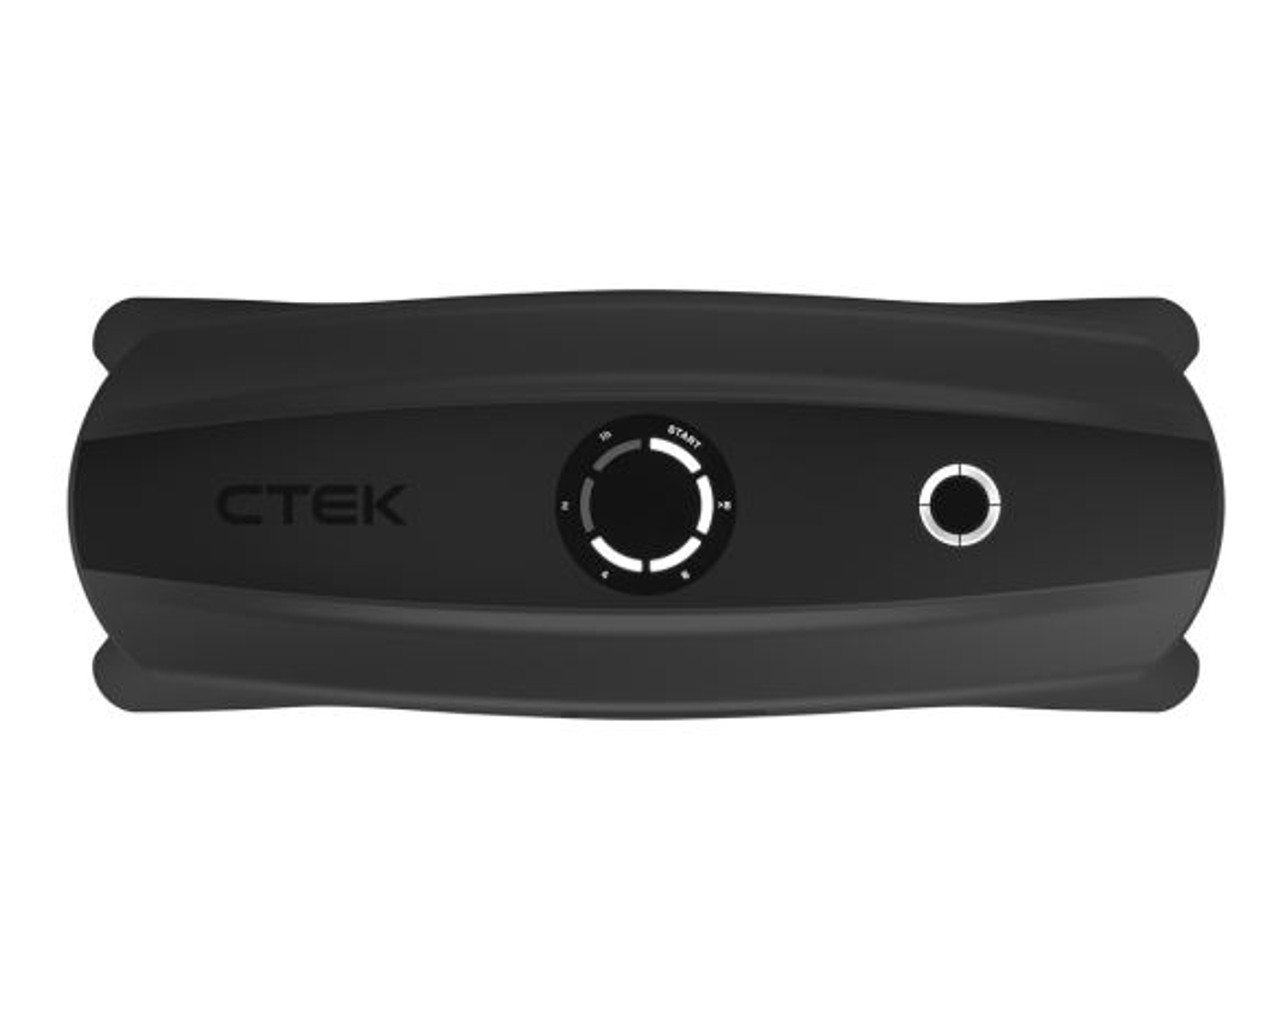 CTEK CS FREE, 12V Portable Battery Charger, 4-In-1 Charger